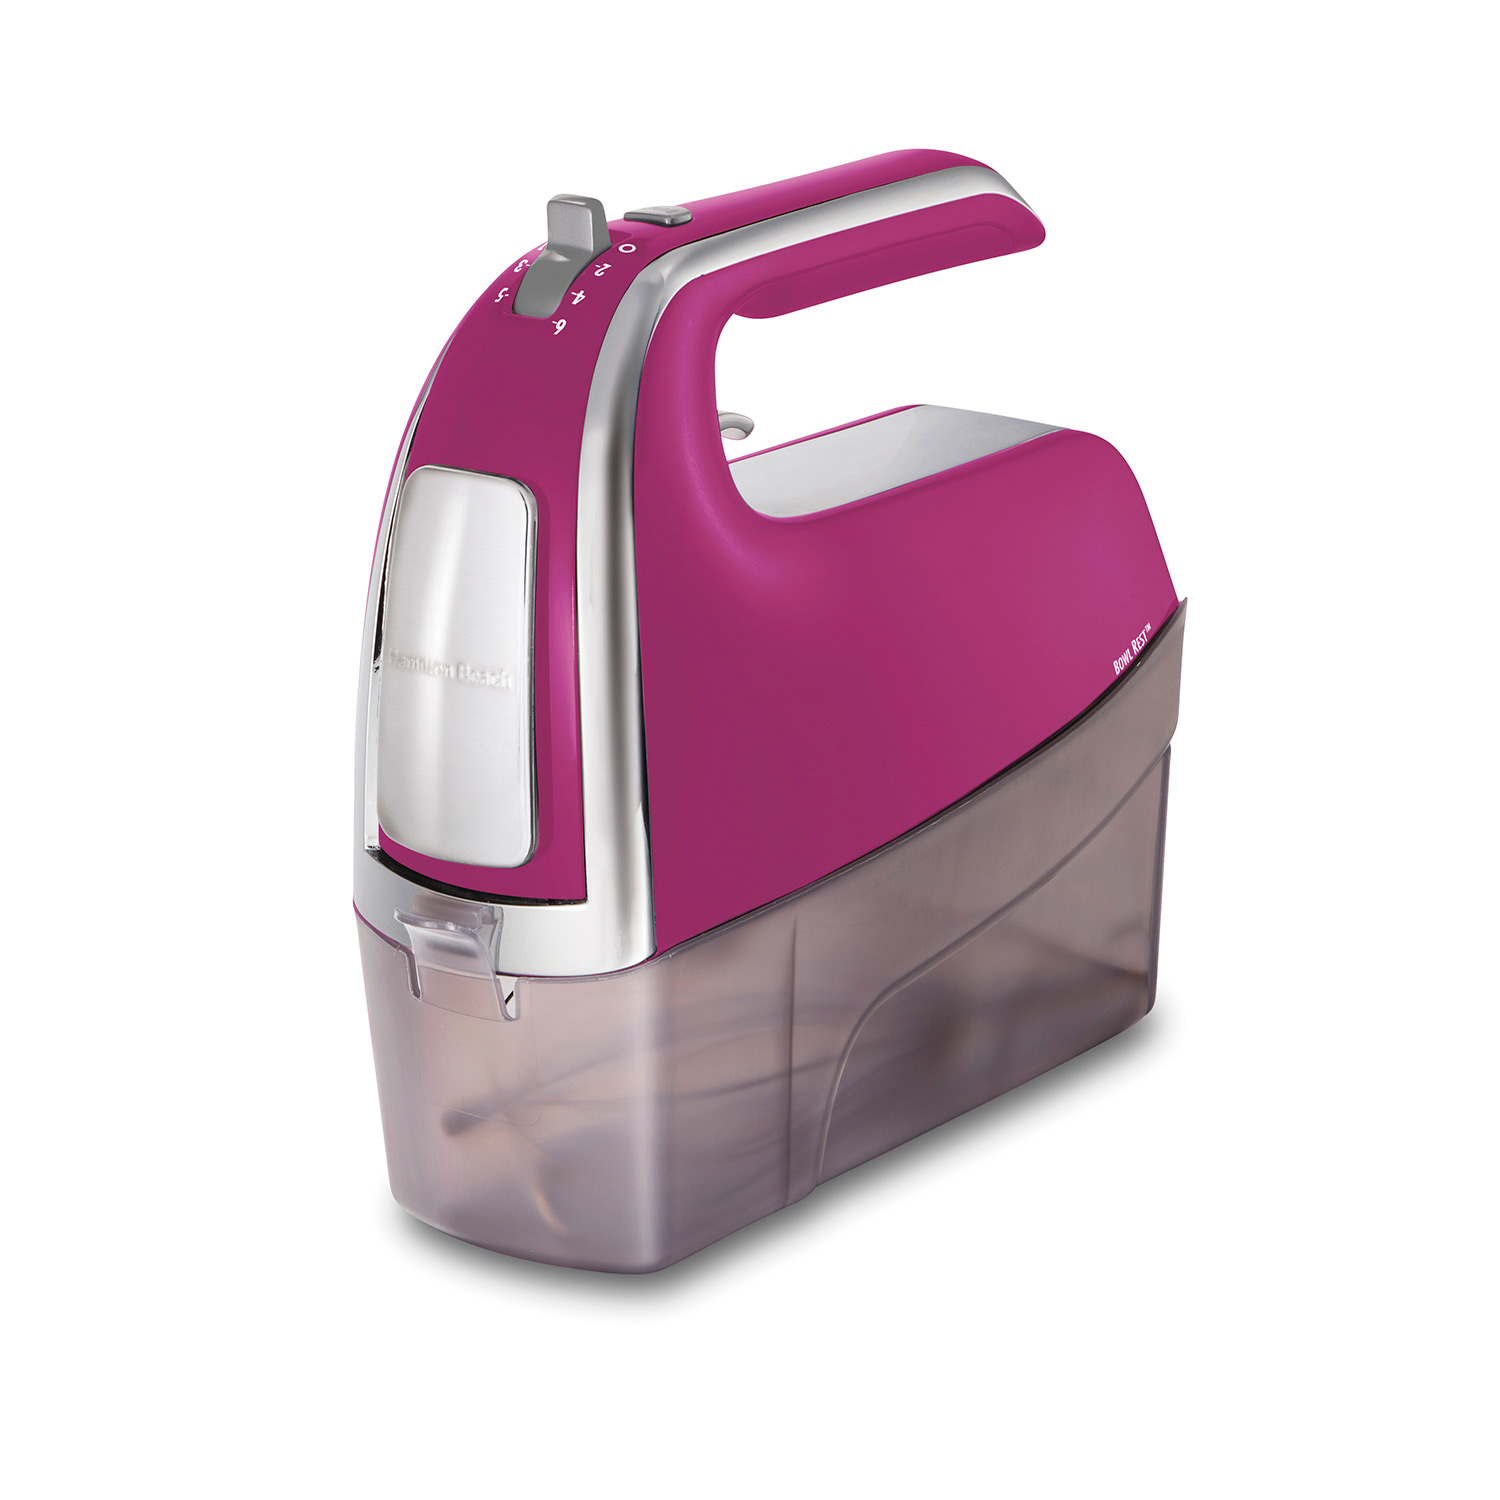 6 Speed Hand Mixer with Pulse and Snap-On Case, Raspberry (62621)